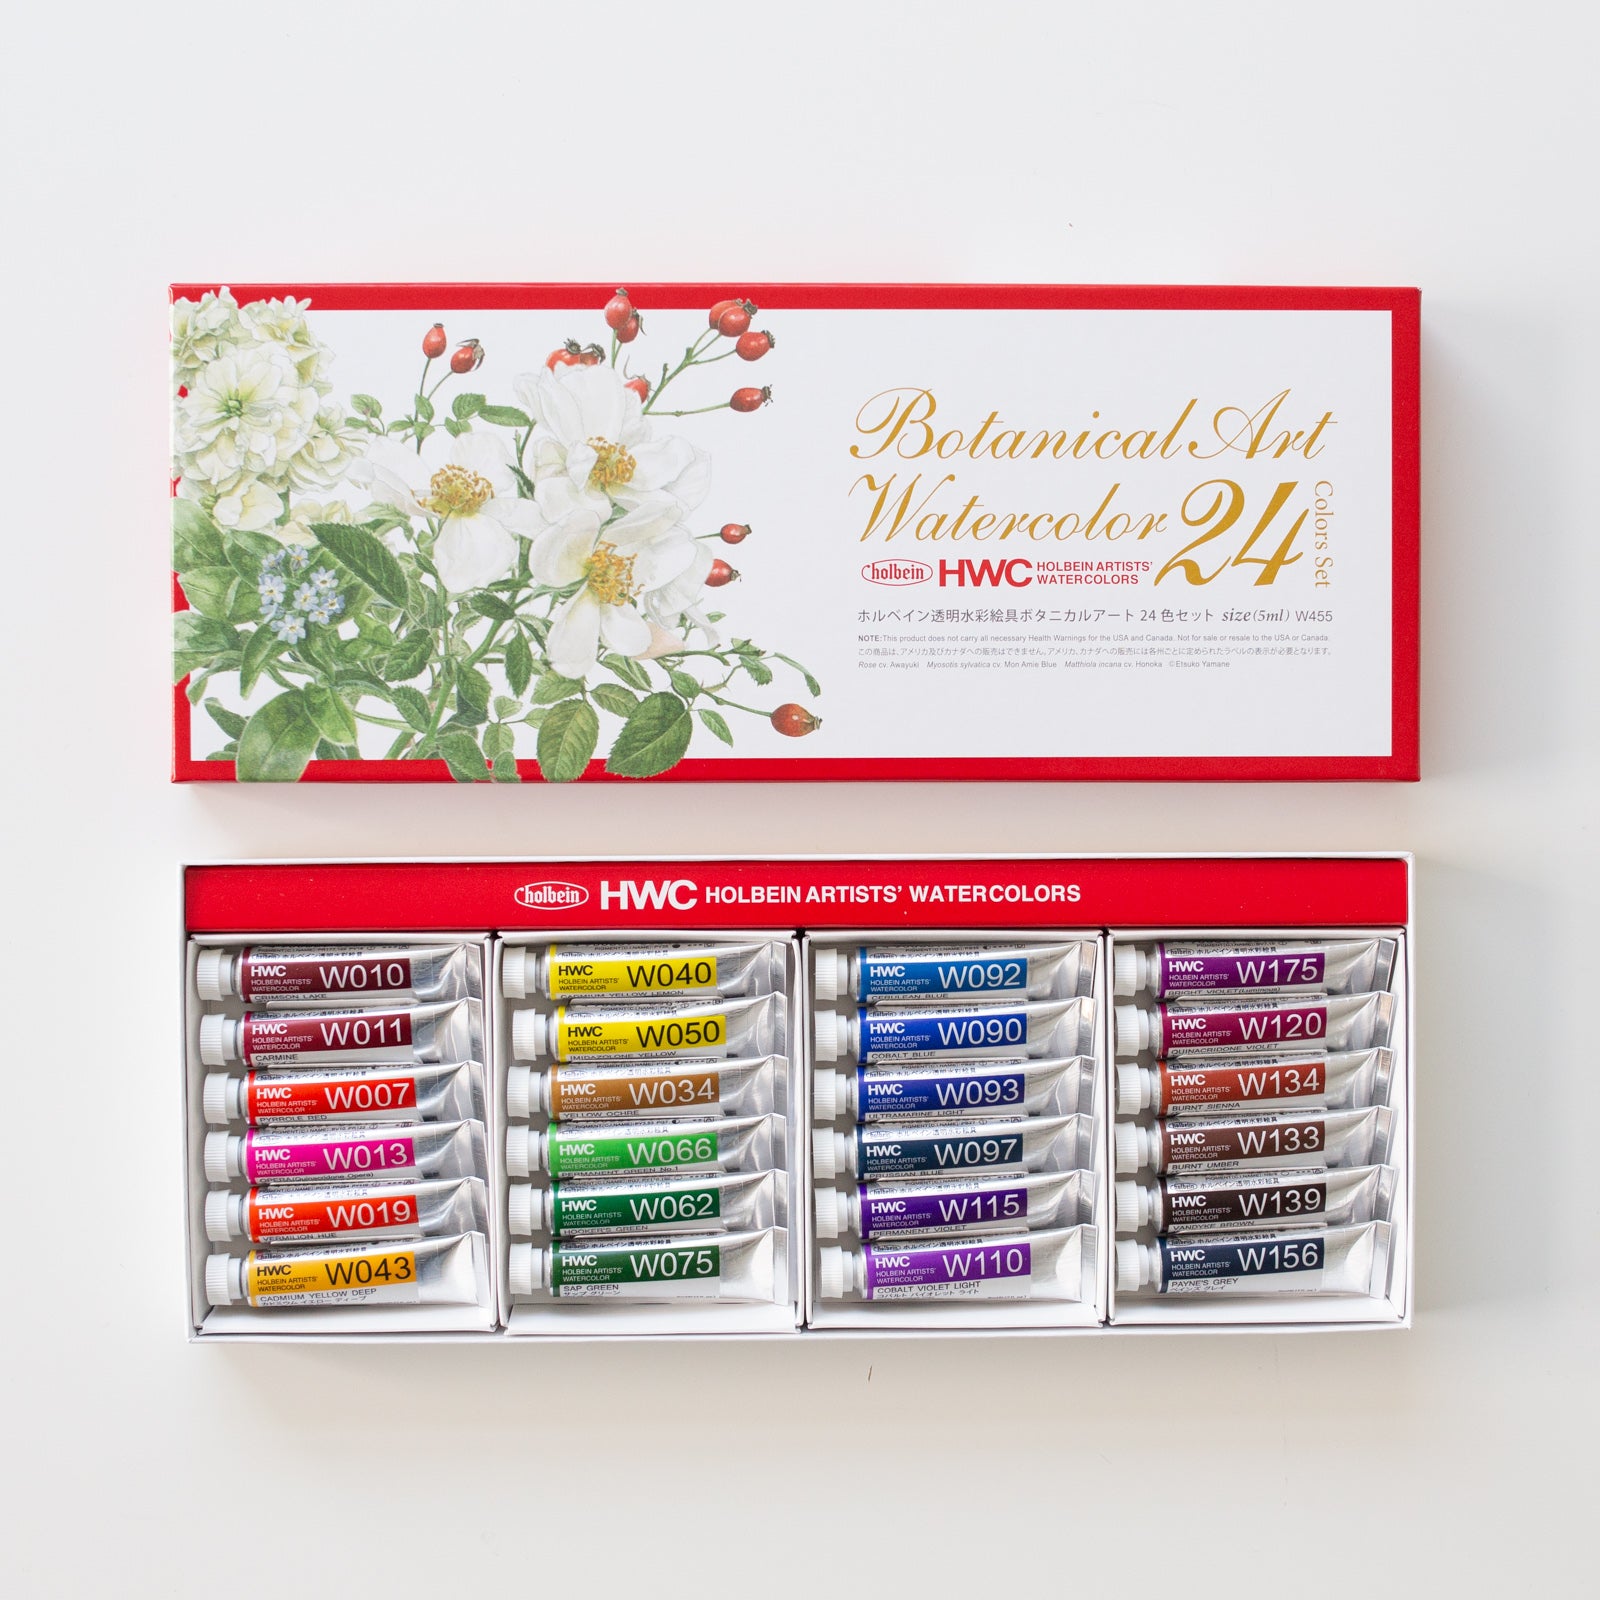 Holbein Watercolor Botanical set 24